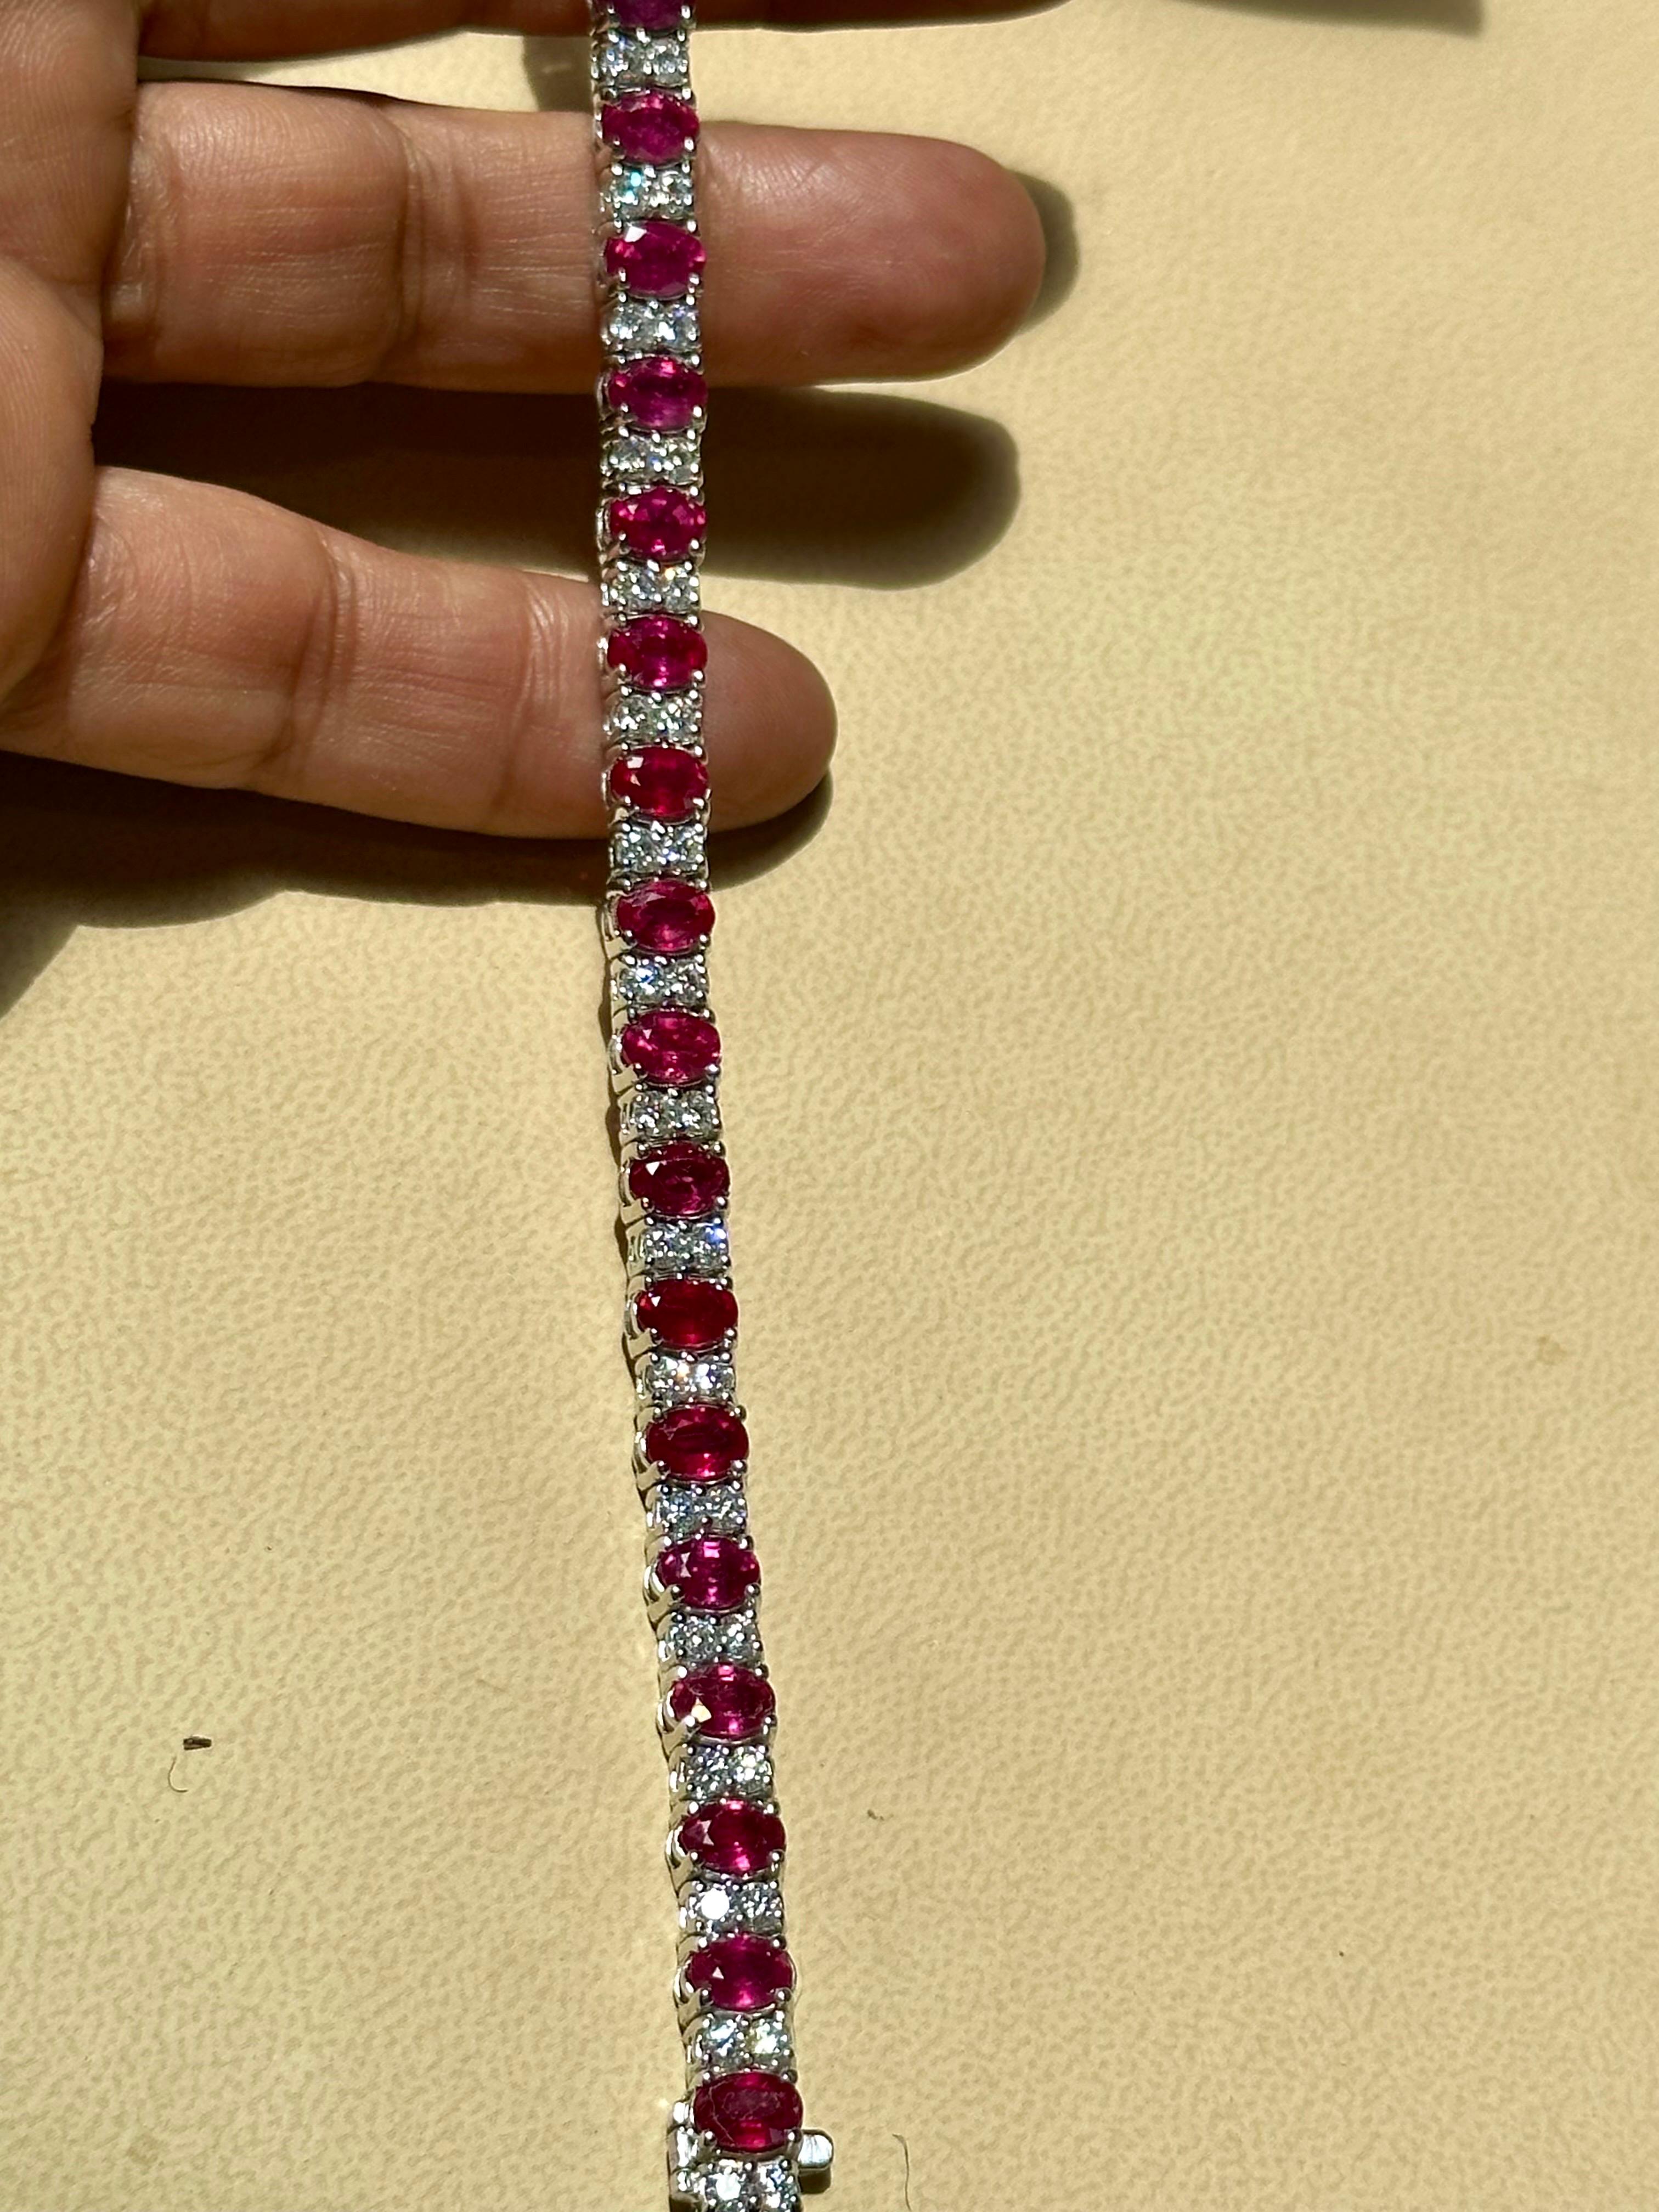 12 Carat Treated Ruby & 2.8 Carat Diamond Tennis Bracelet 14 Kt Yellow Gold
 This exceptionally affordable Tennis  bracelet has  22 stones of  Treated  oval shape  quality  Ruby . Each Ruby is spaced by two diamonds .Total weight of Ruby is 